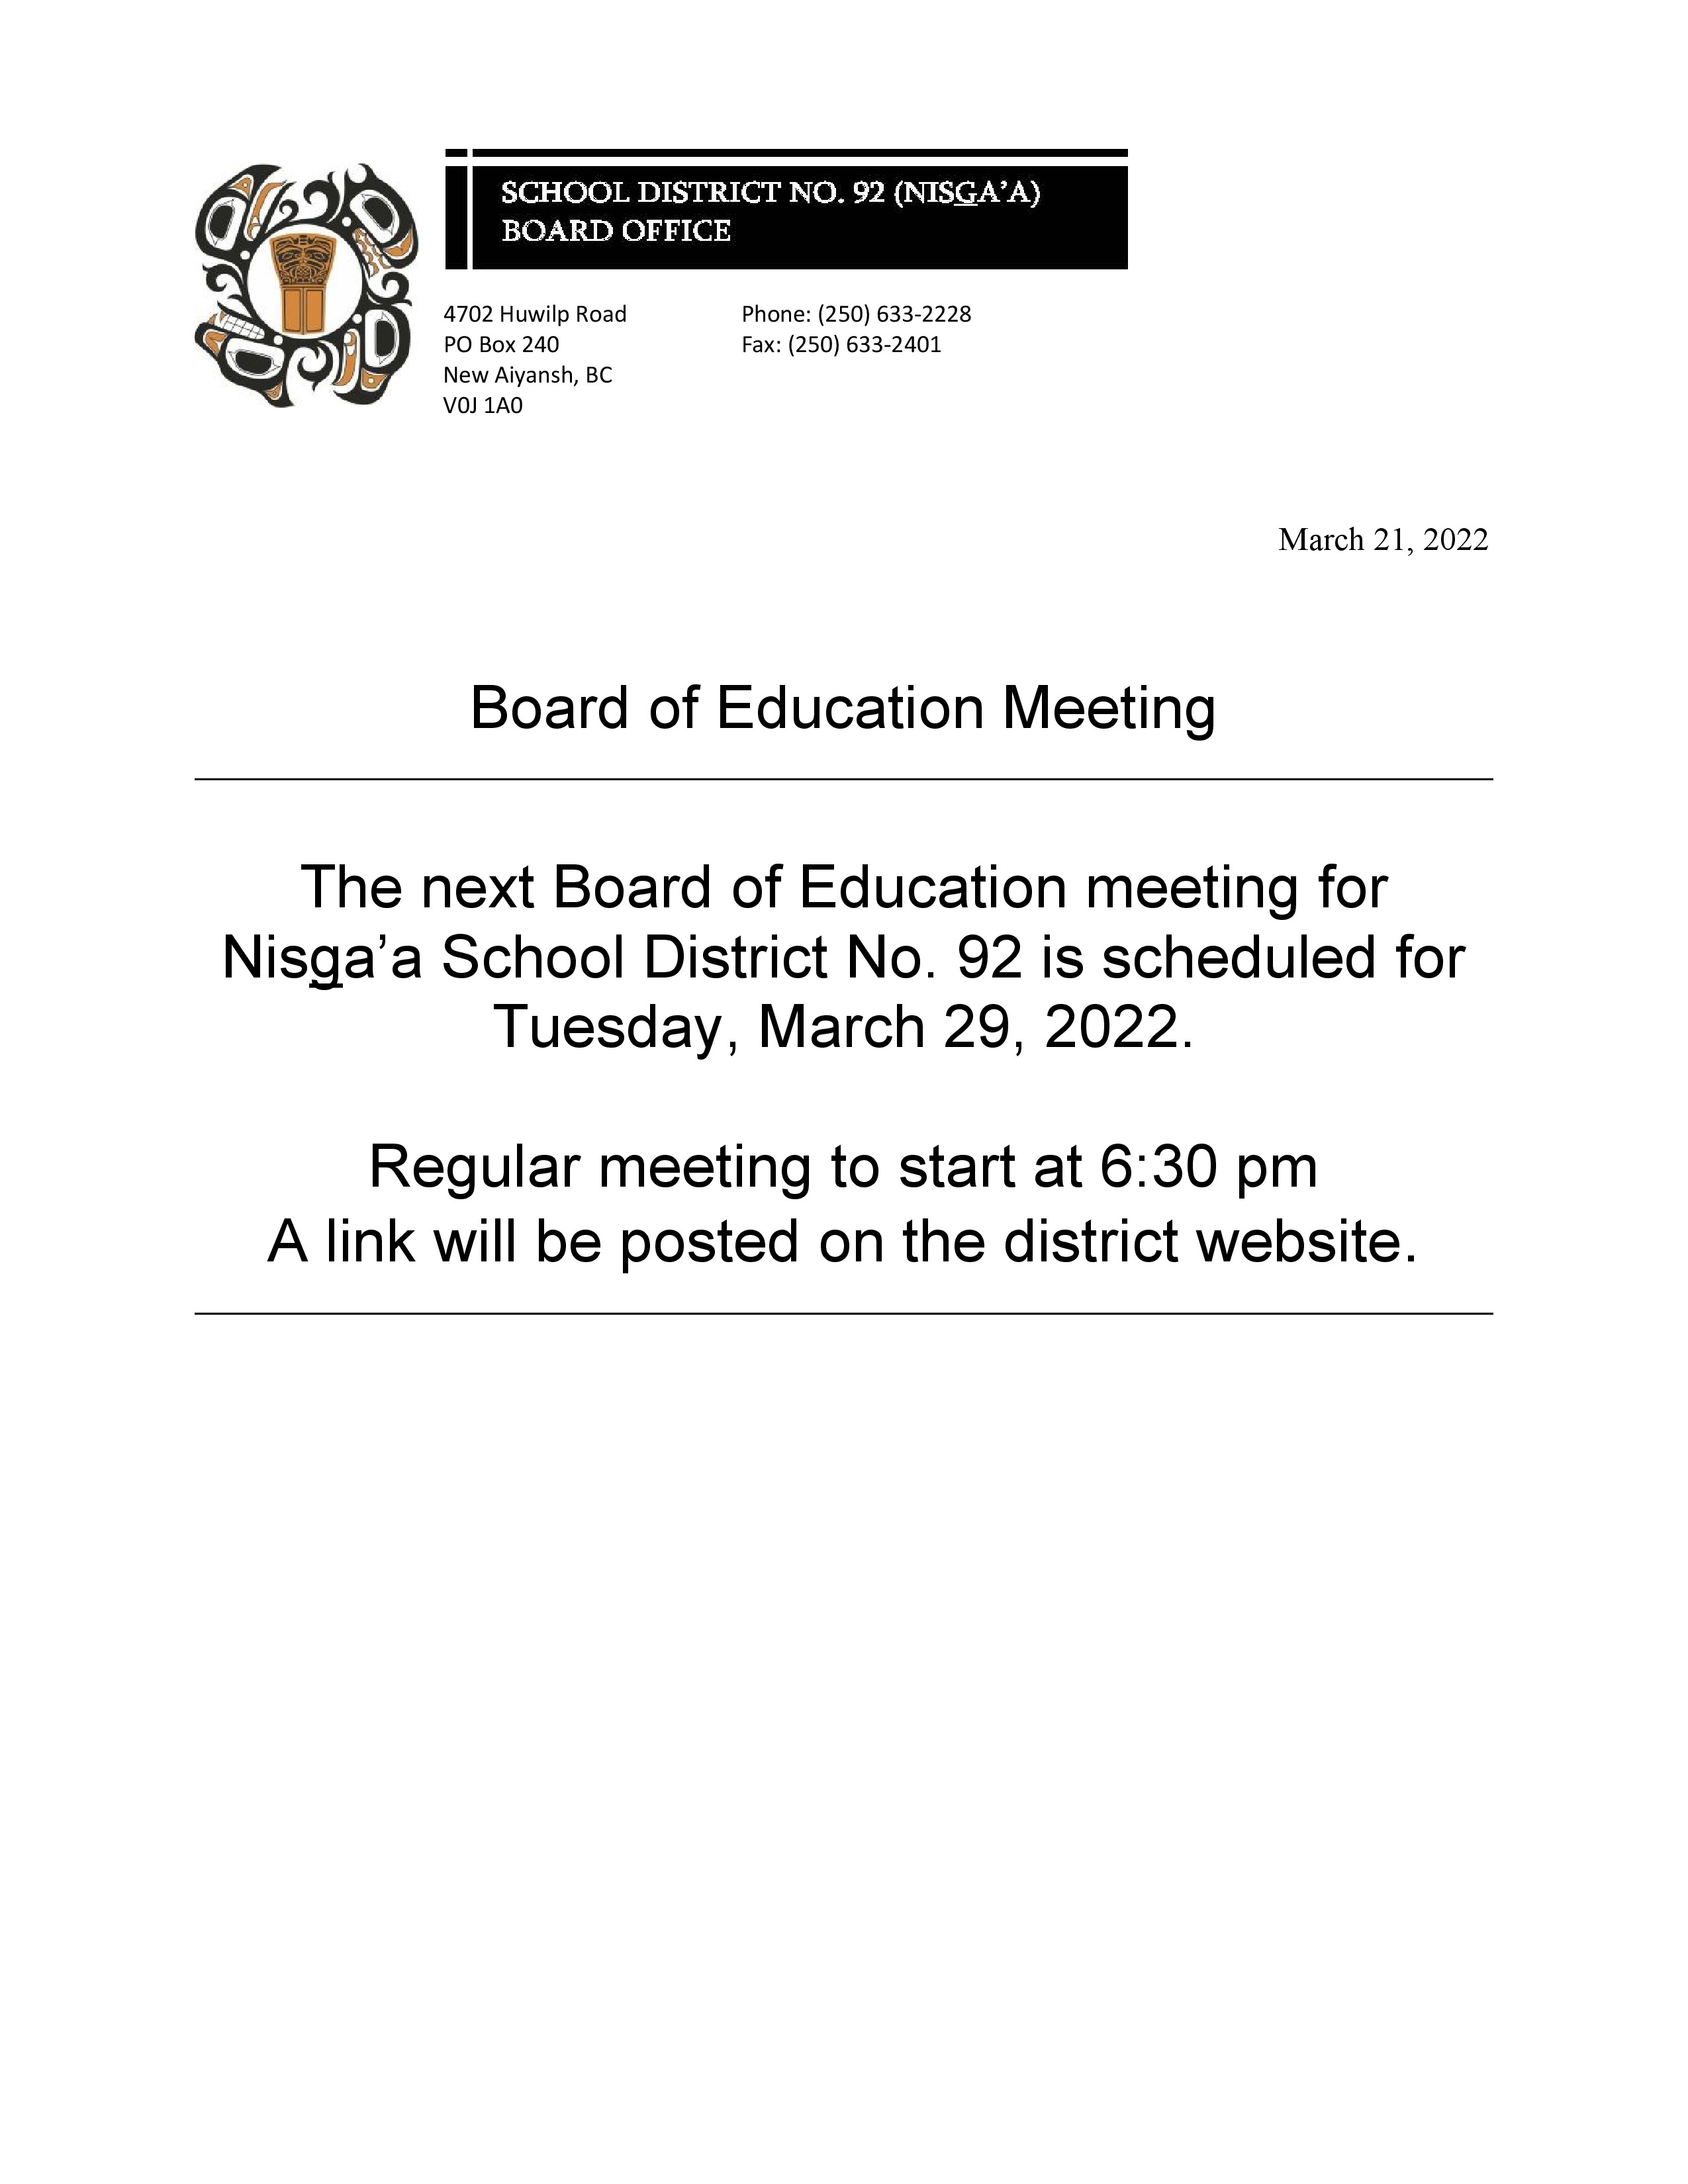 Mar 21. 2022. Board of Education Meeting. March 29-2022